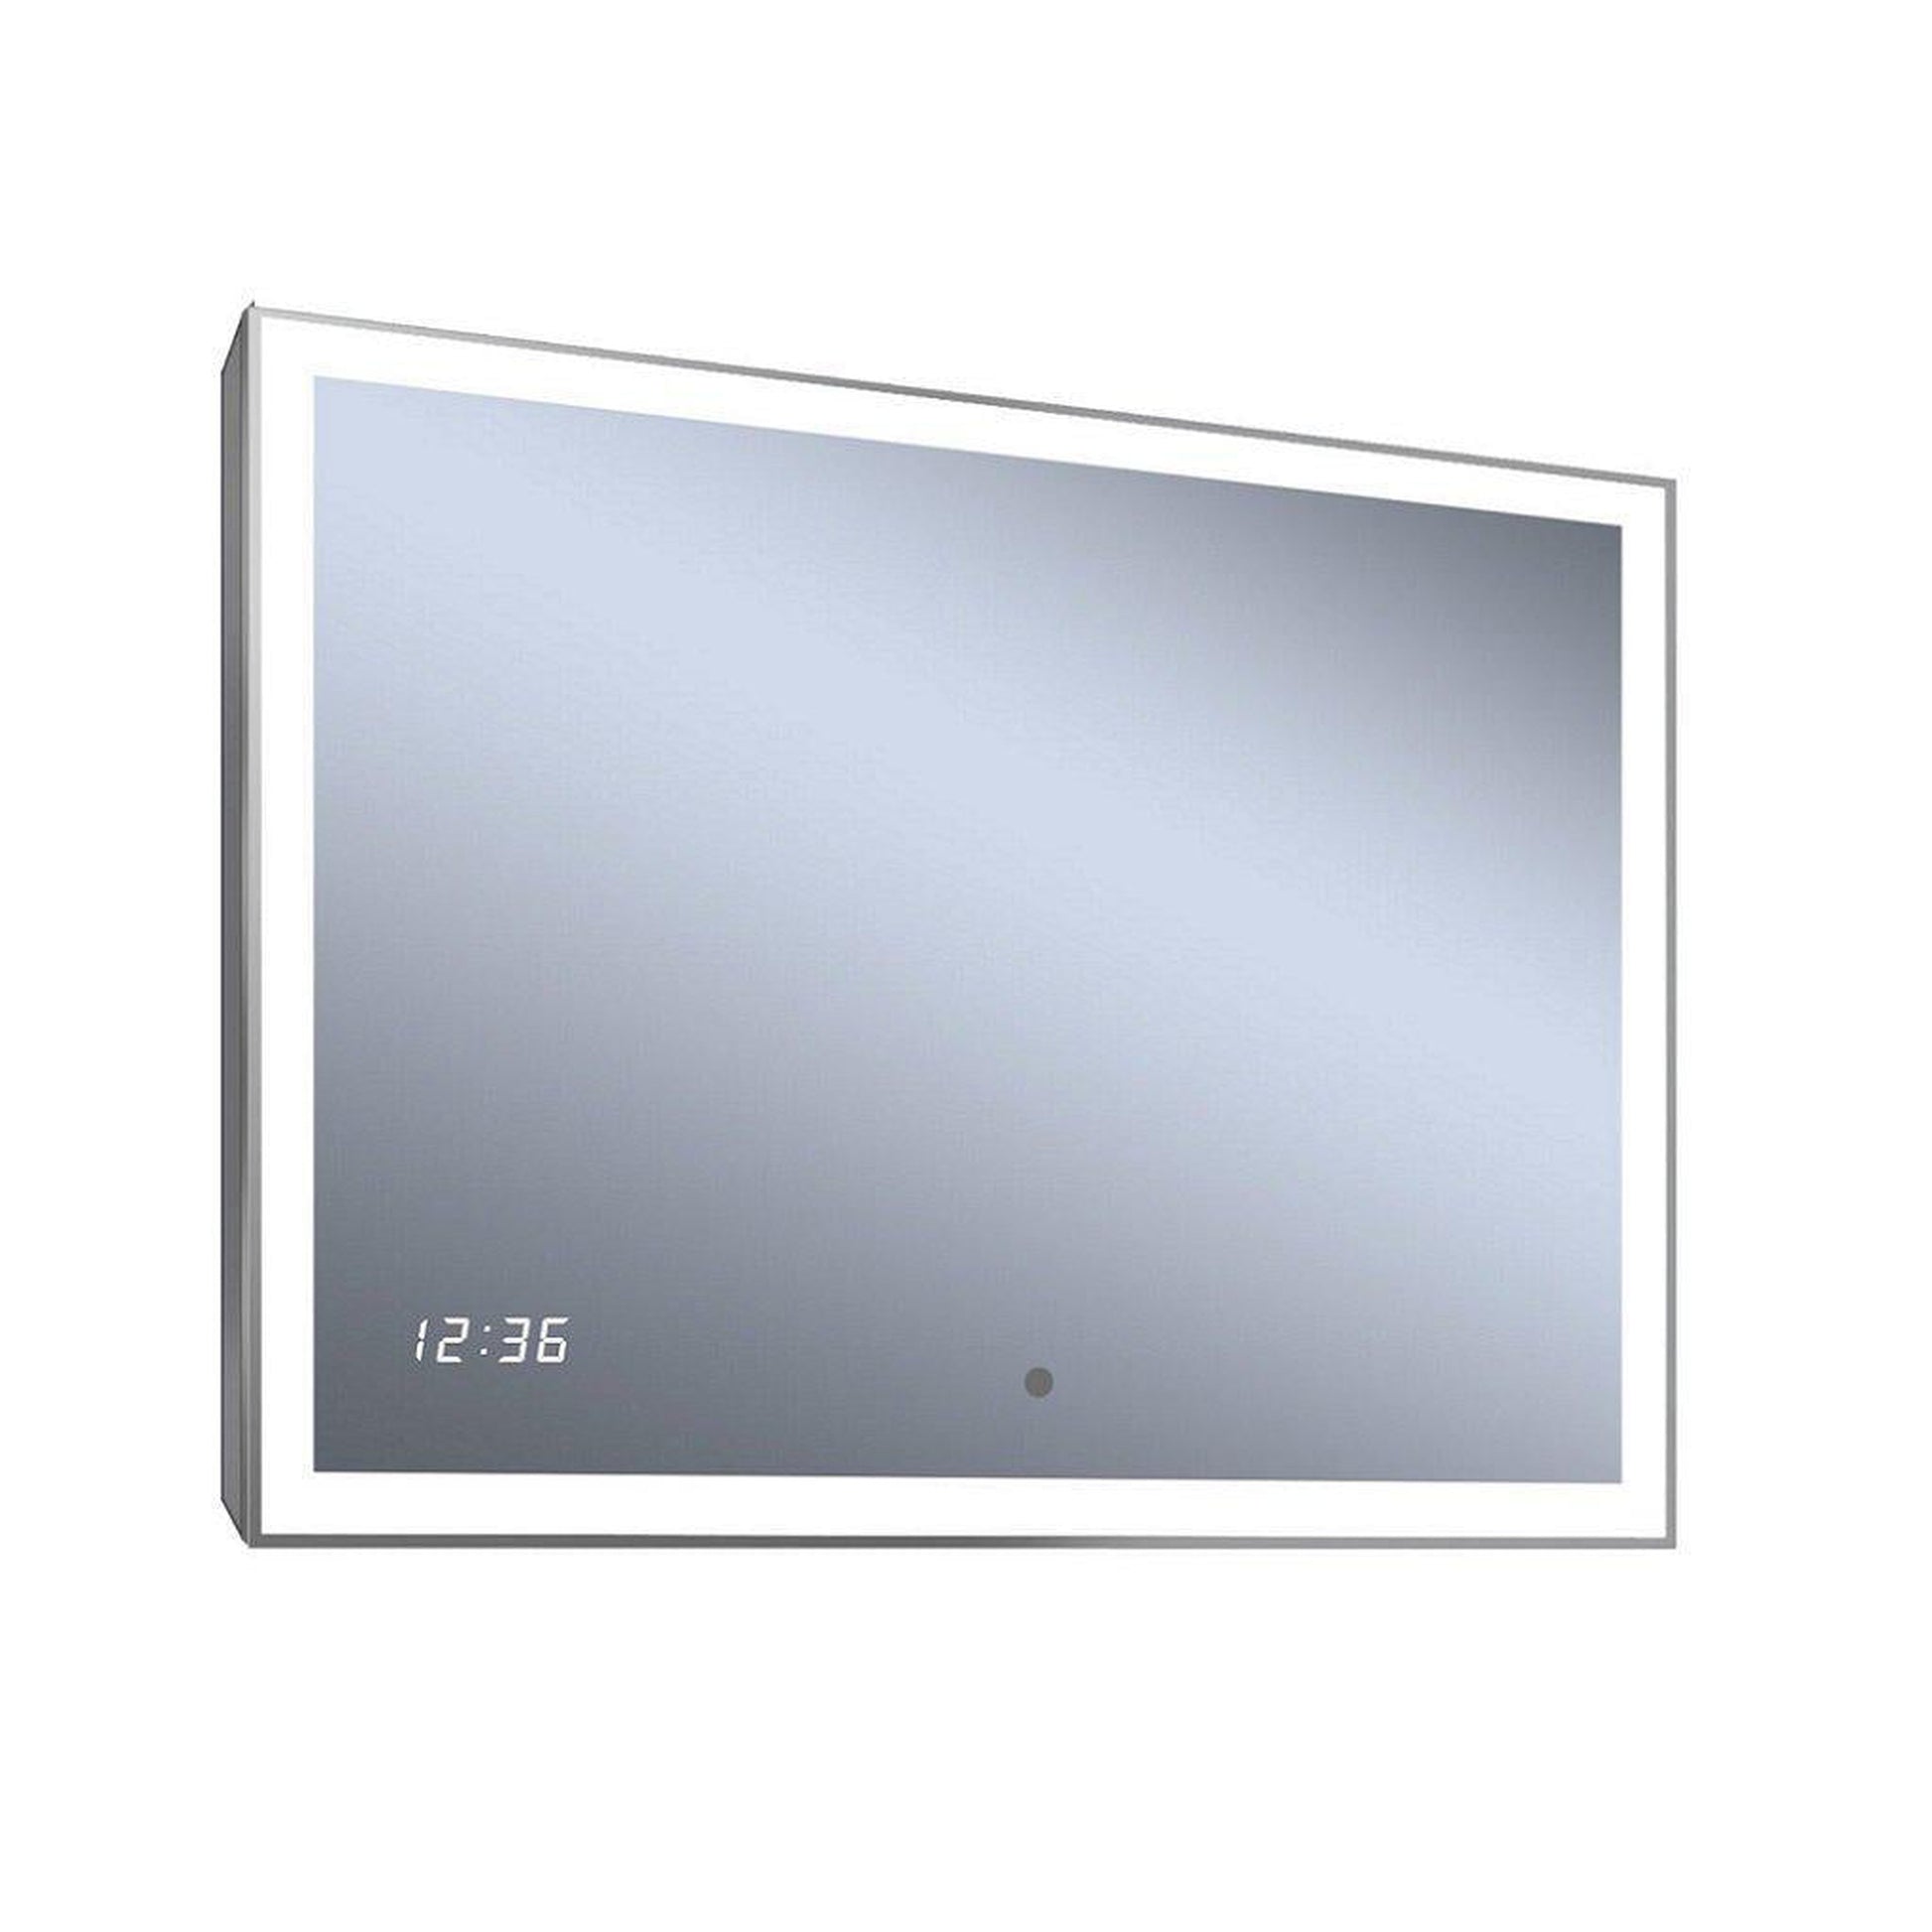 Lighted Impressions Moments 32" x 24" Rectangular Framed Wall-Mounted LED Mirror With IR Sensor & Digital Clock